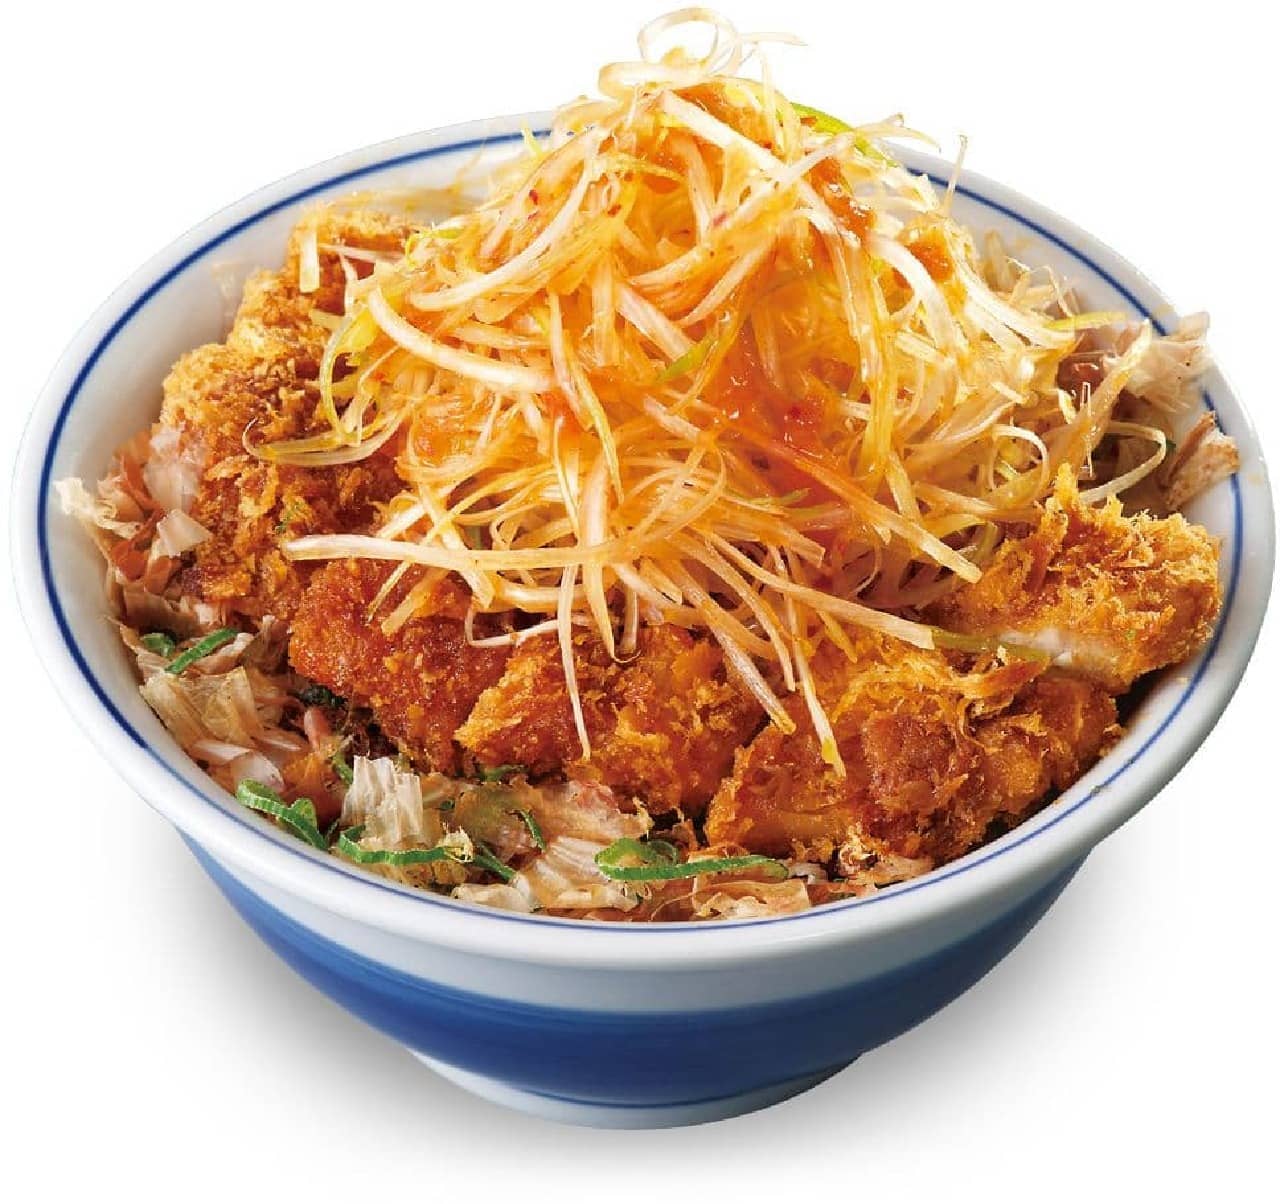 Katsuya "Roast pork cutlet served on top of a bowl of rice with green onion and scallion raayu